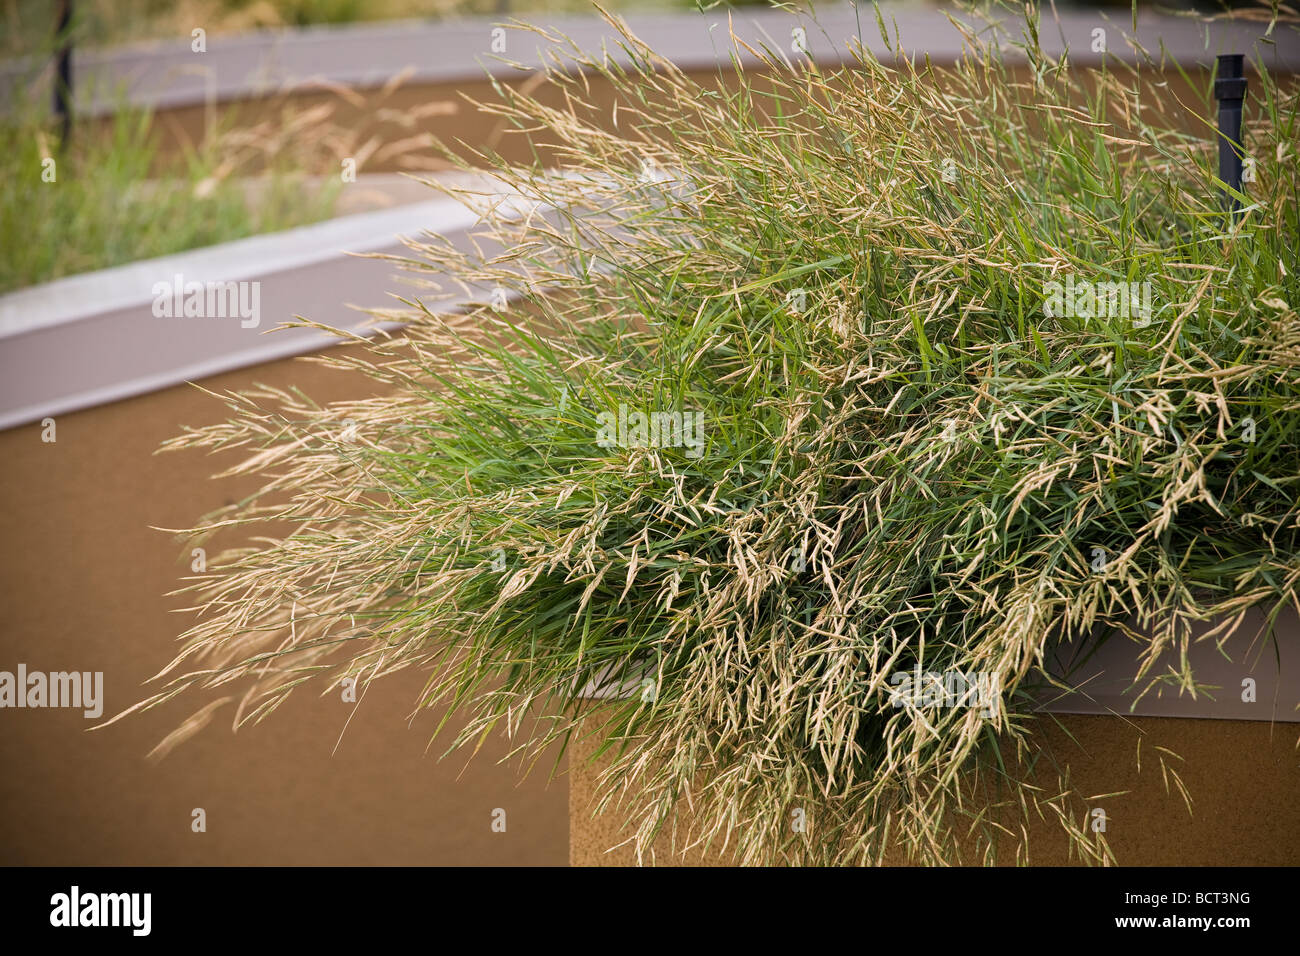 Mediterranean False-brome groundcover in grass flowering in meadow green roof garden on California home Stock Photo